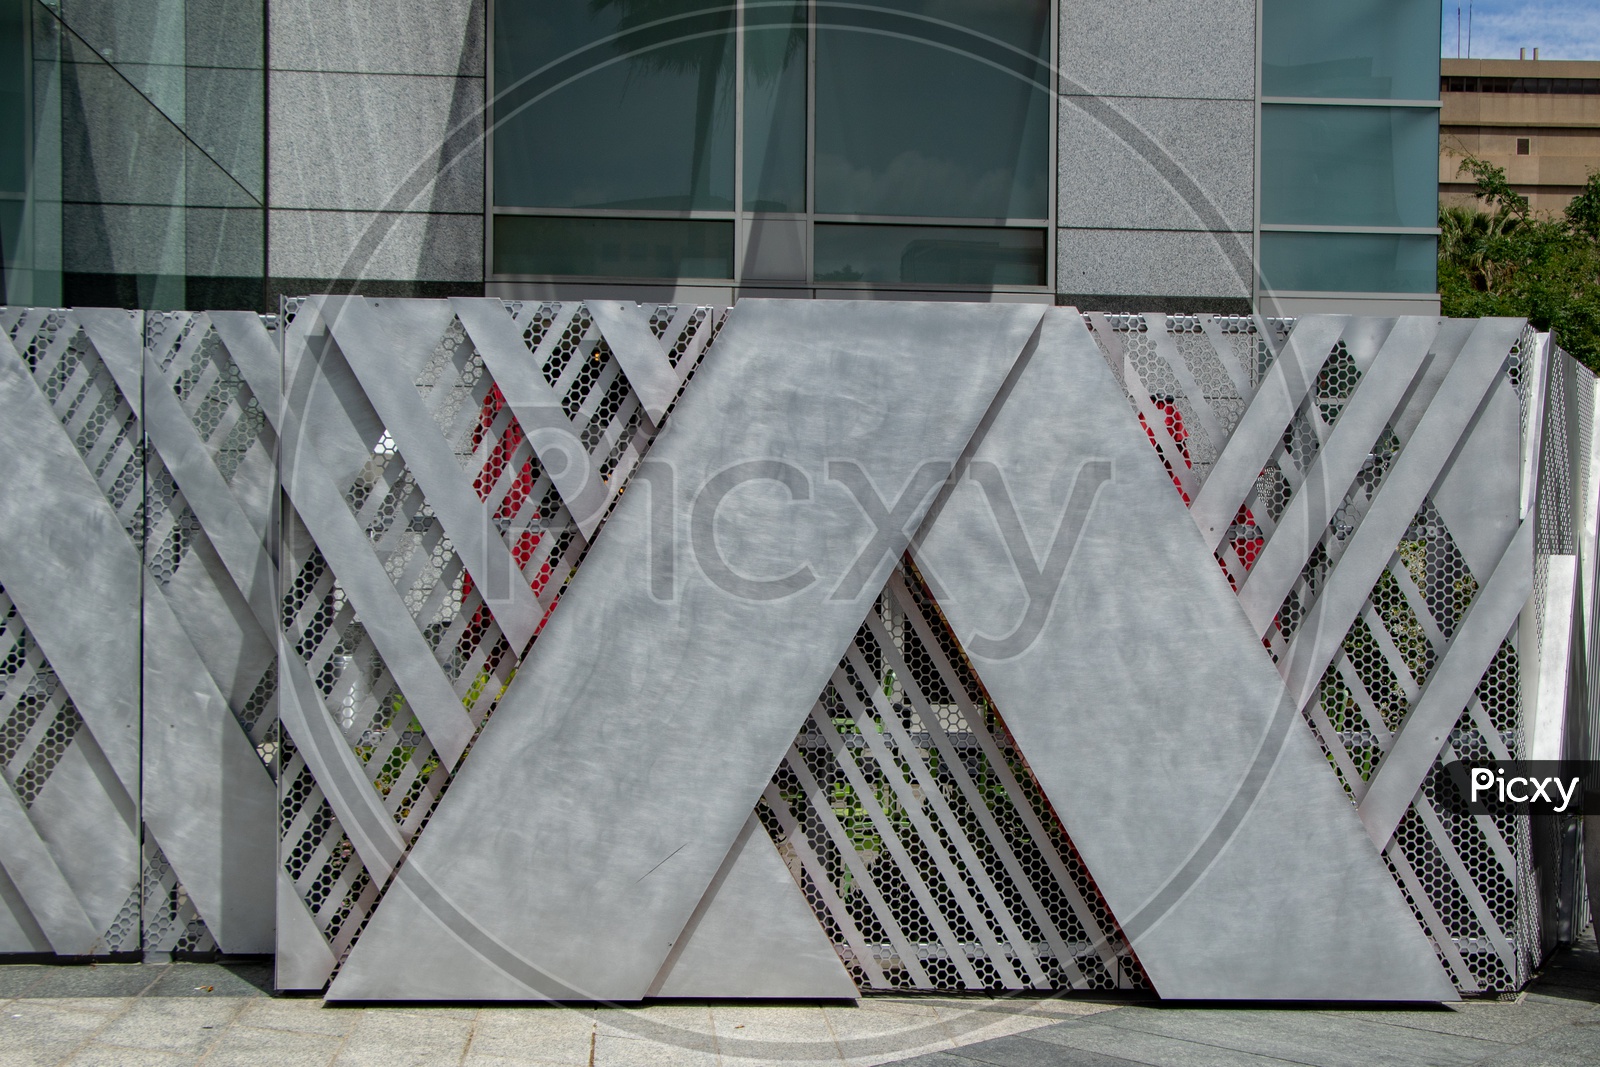 Adobe Corporate office at Headquarters